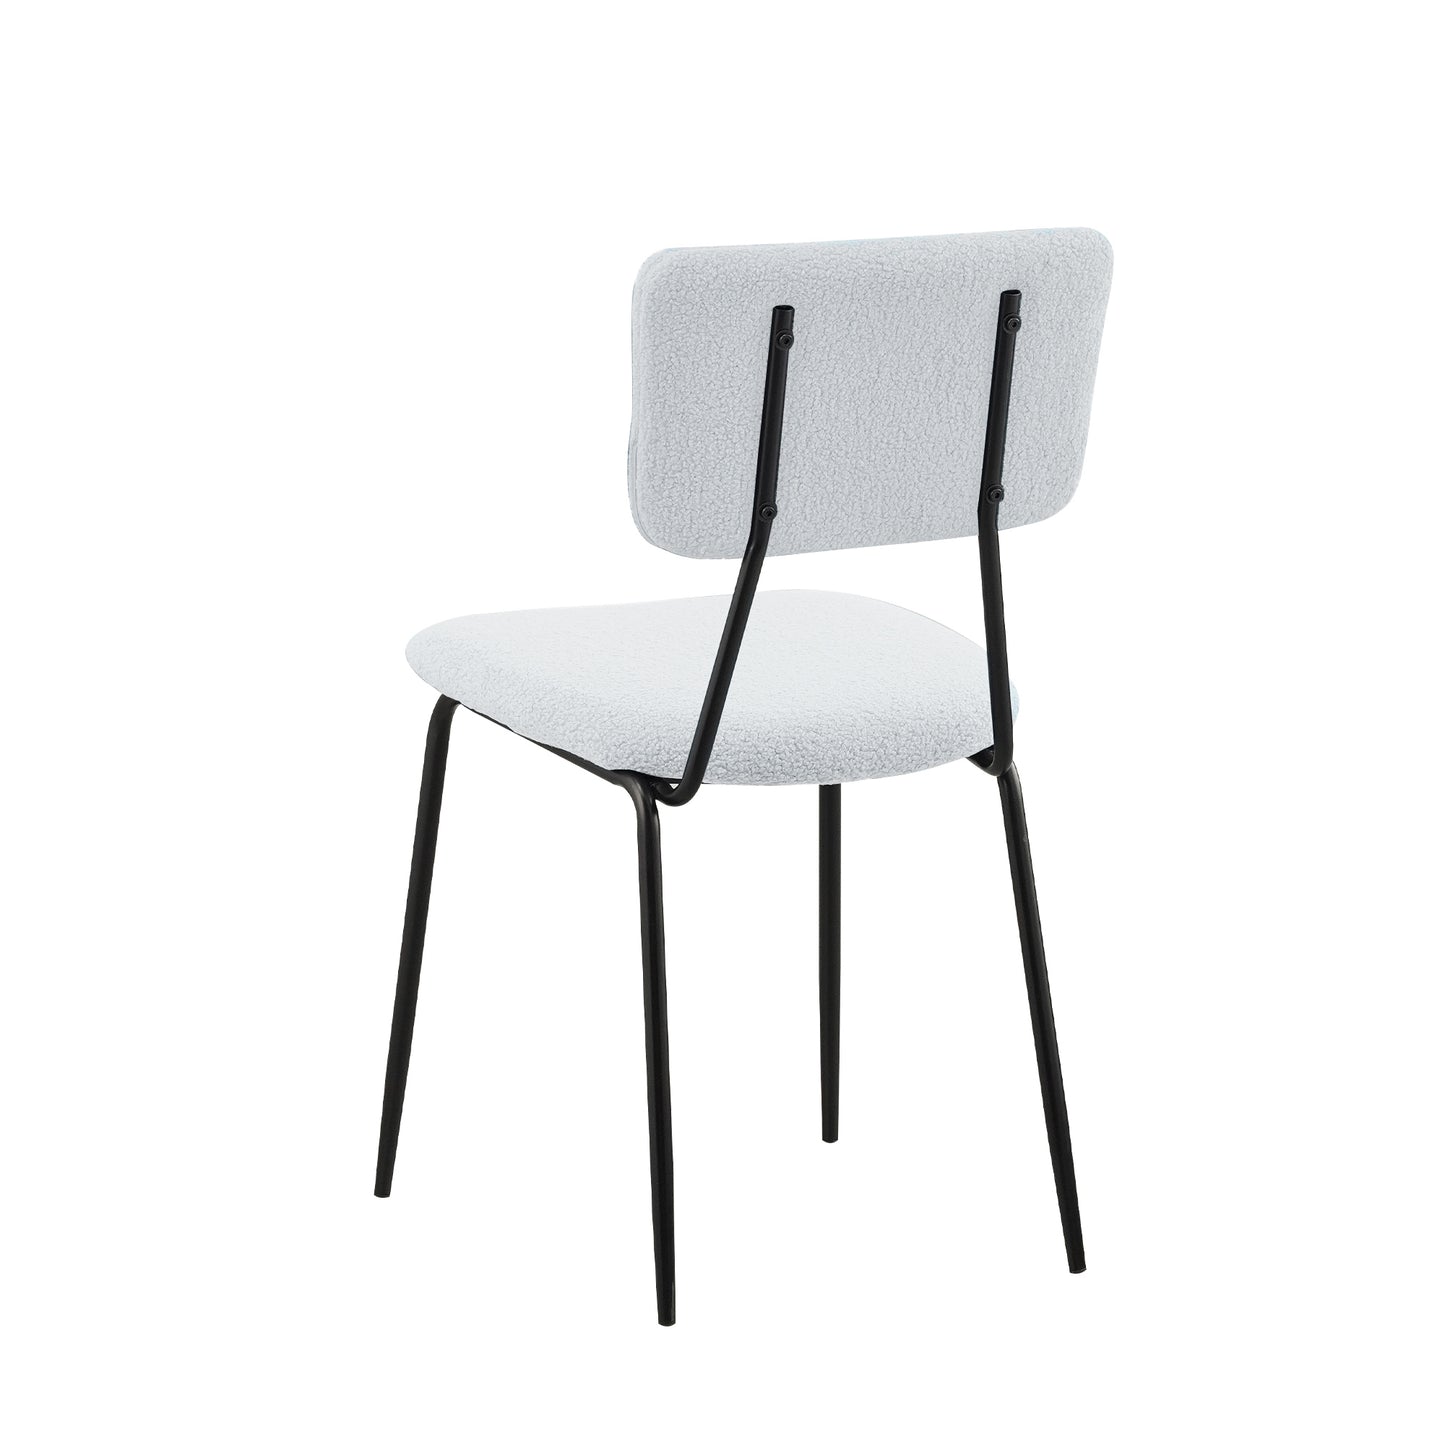 Dining Room Chairs Set of 4, Modern Comfortable Feature Chairs with Faux Plush Upholstered Back and Chrome Legs, Kitchen Side Chairs for Indoor Use: Home, Apartment (4 White Chairs)